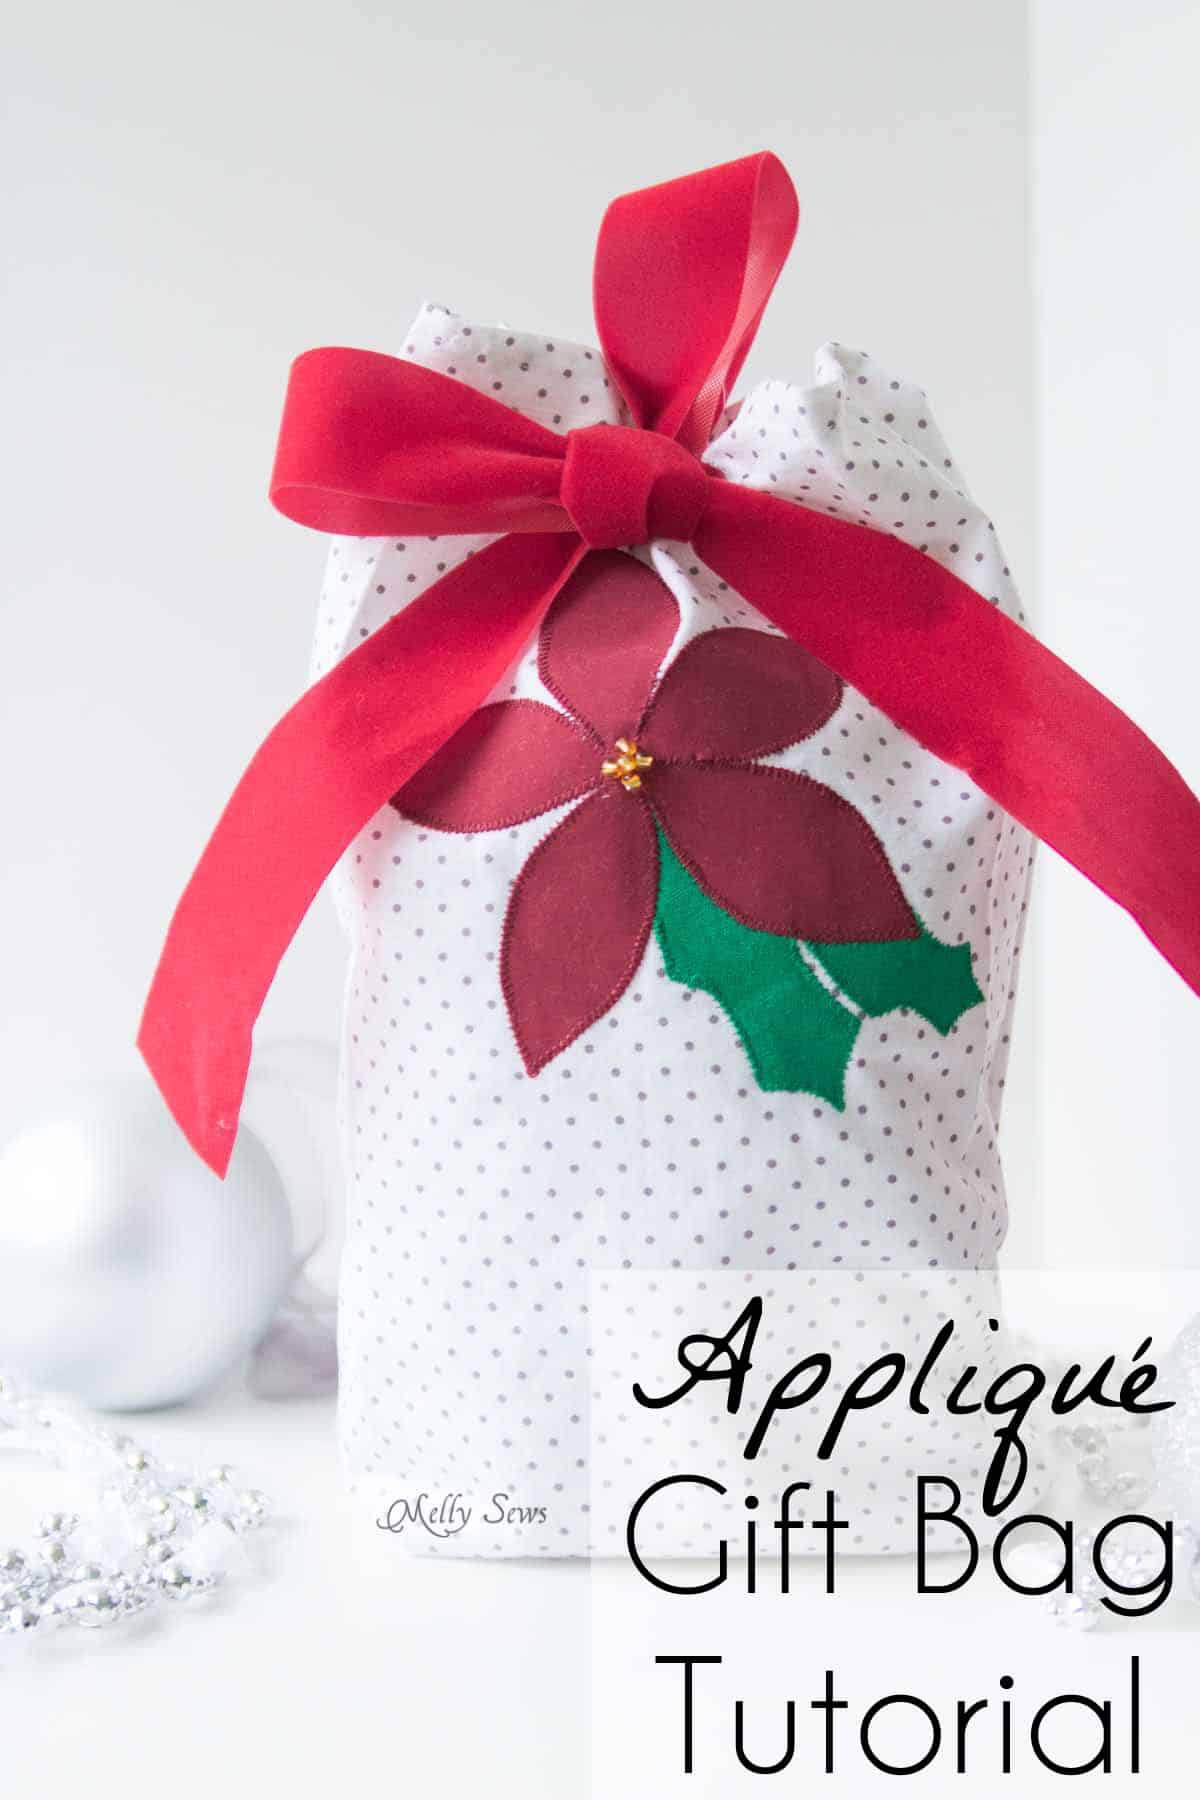 appliquéd gift bag tutorial - sew reusable gift bags and use up your scraps! Sewing tutorial by Melly Sews